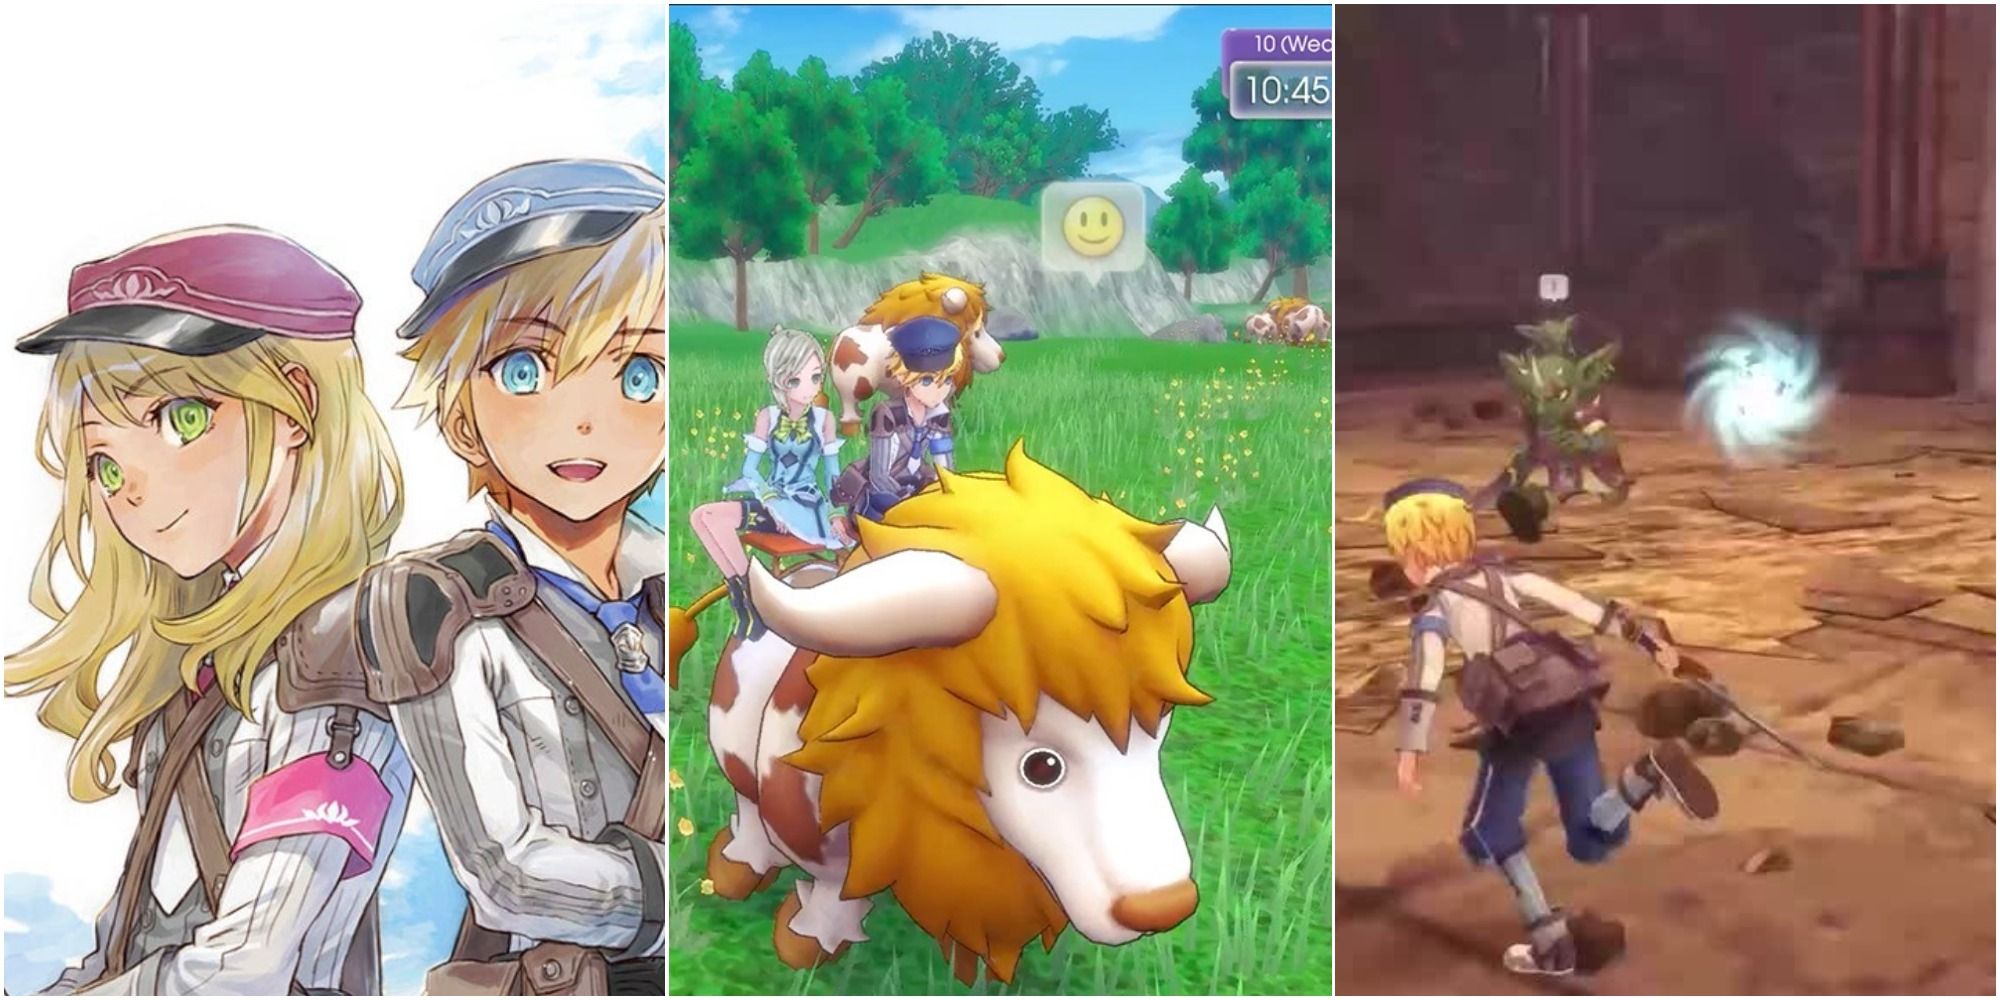 Rune Factory 5 protagonists, riding a fluffy creature, combat